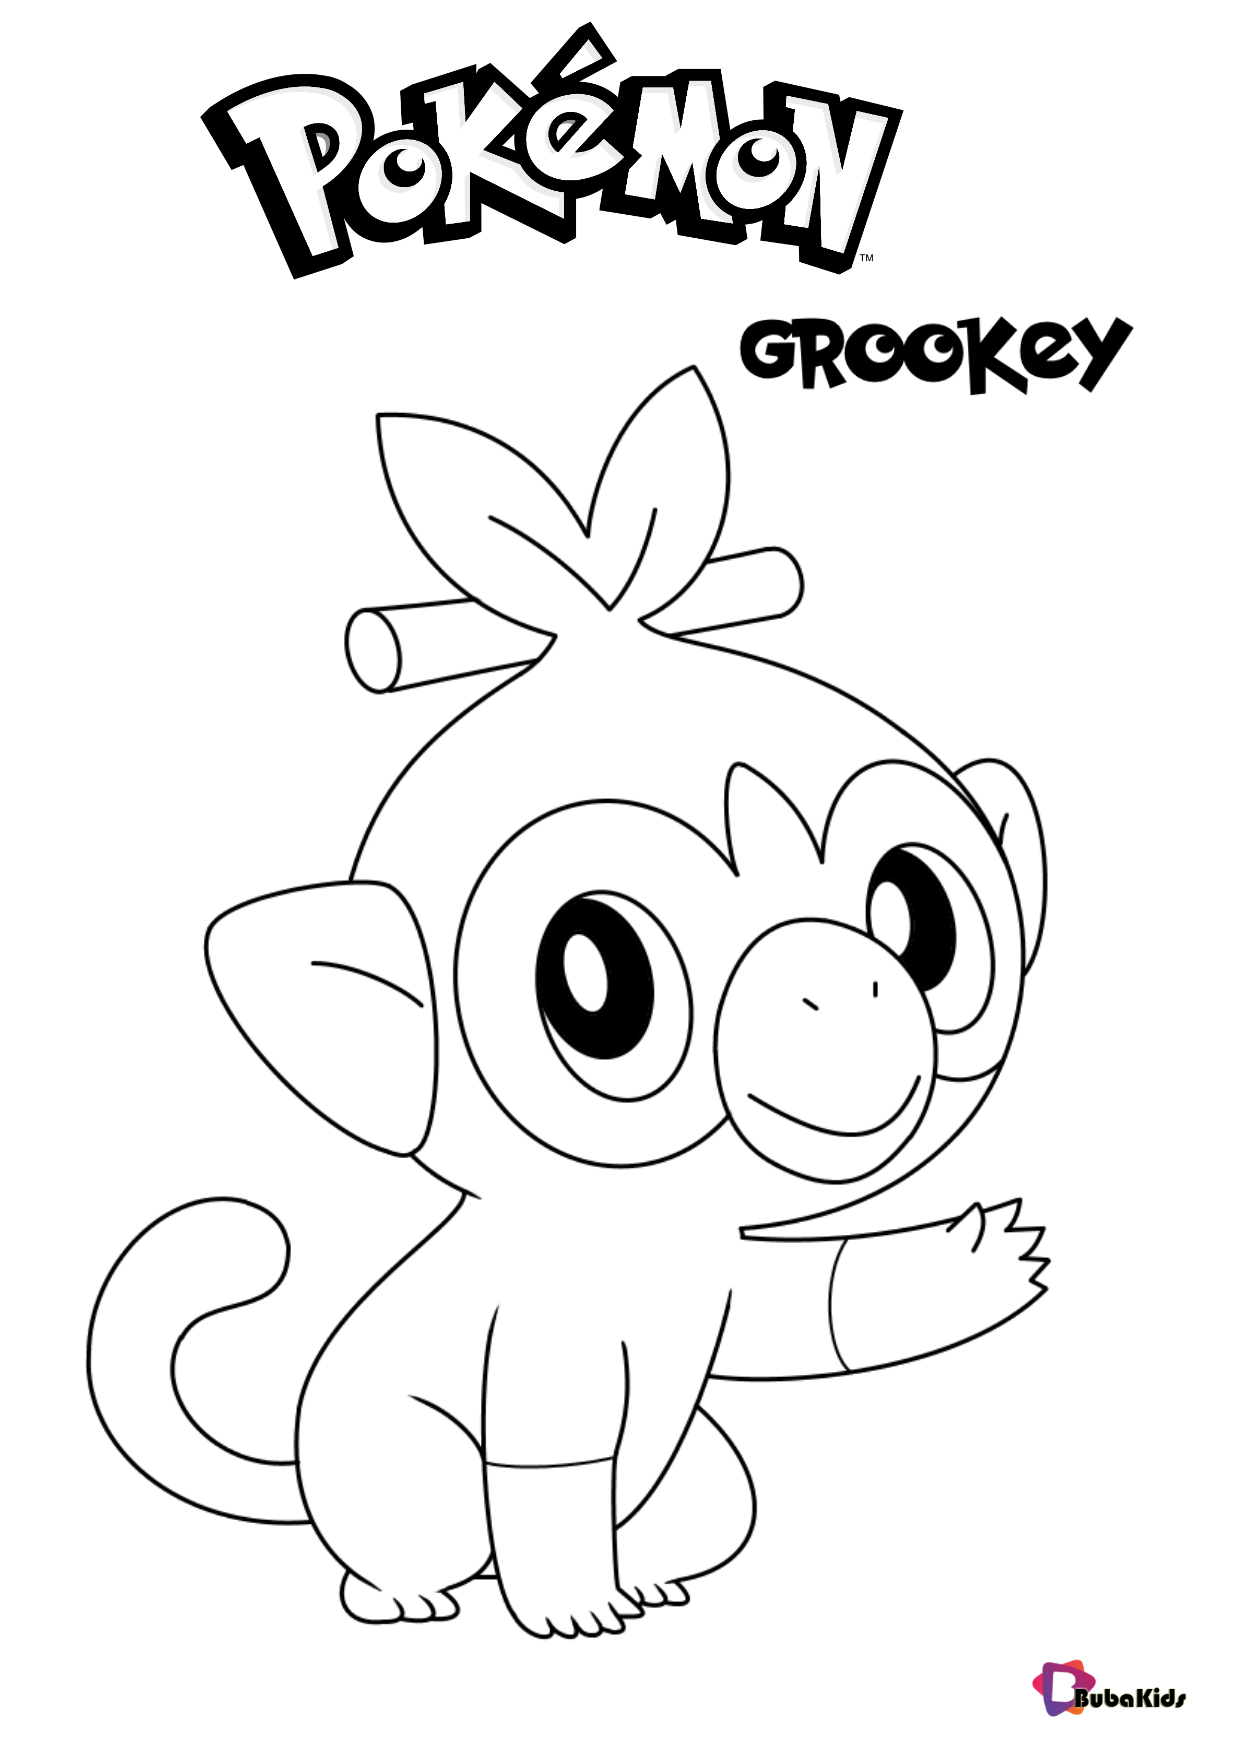 Pokemon Grookey coloring pages Wallpaper